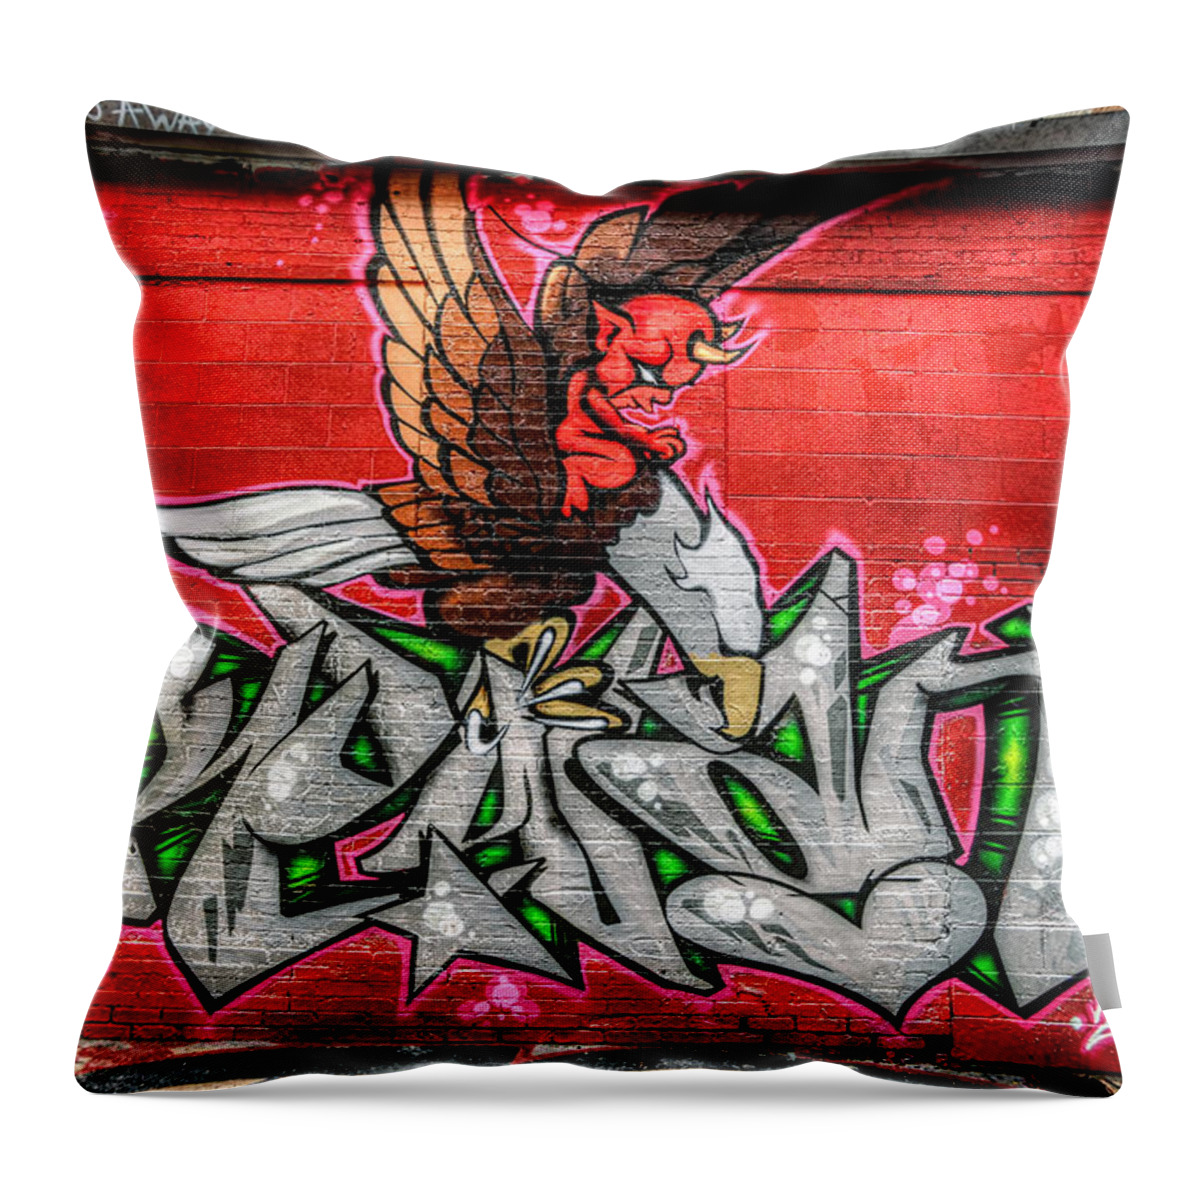 Art Alley Throw Pillow featuring the photograph Art Alley 10 by Adam Vance